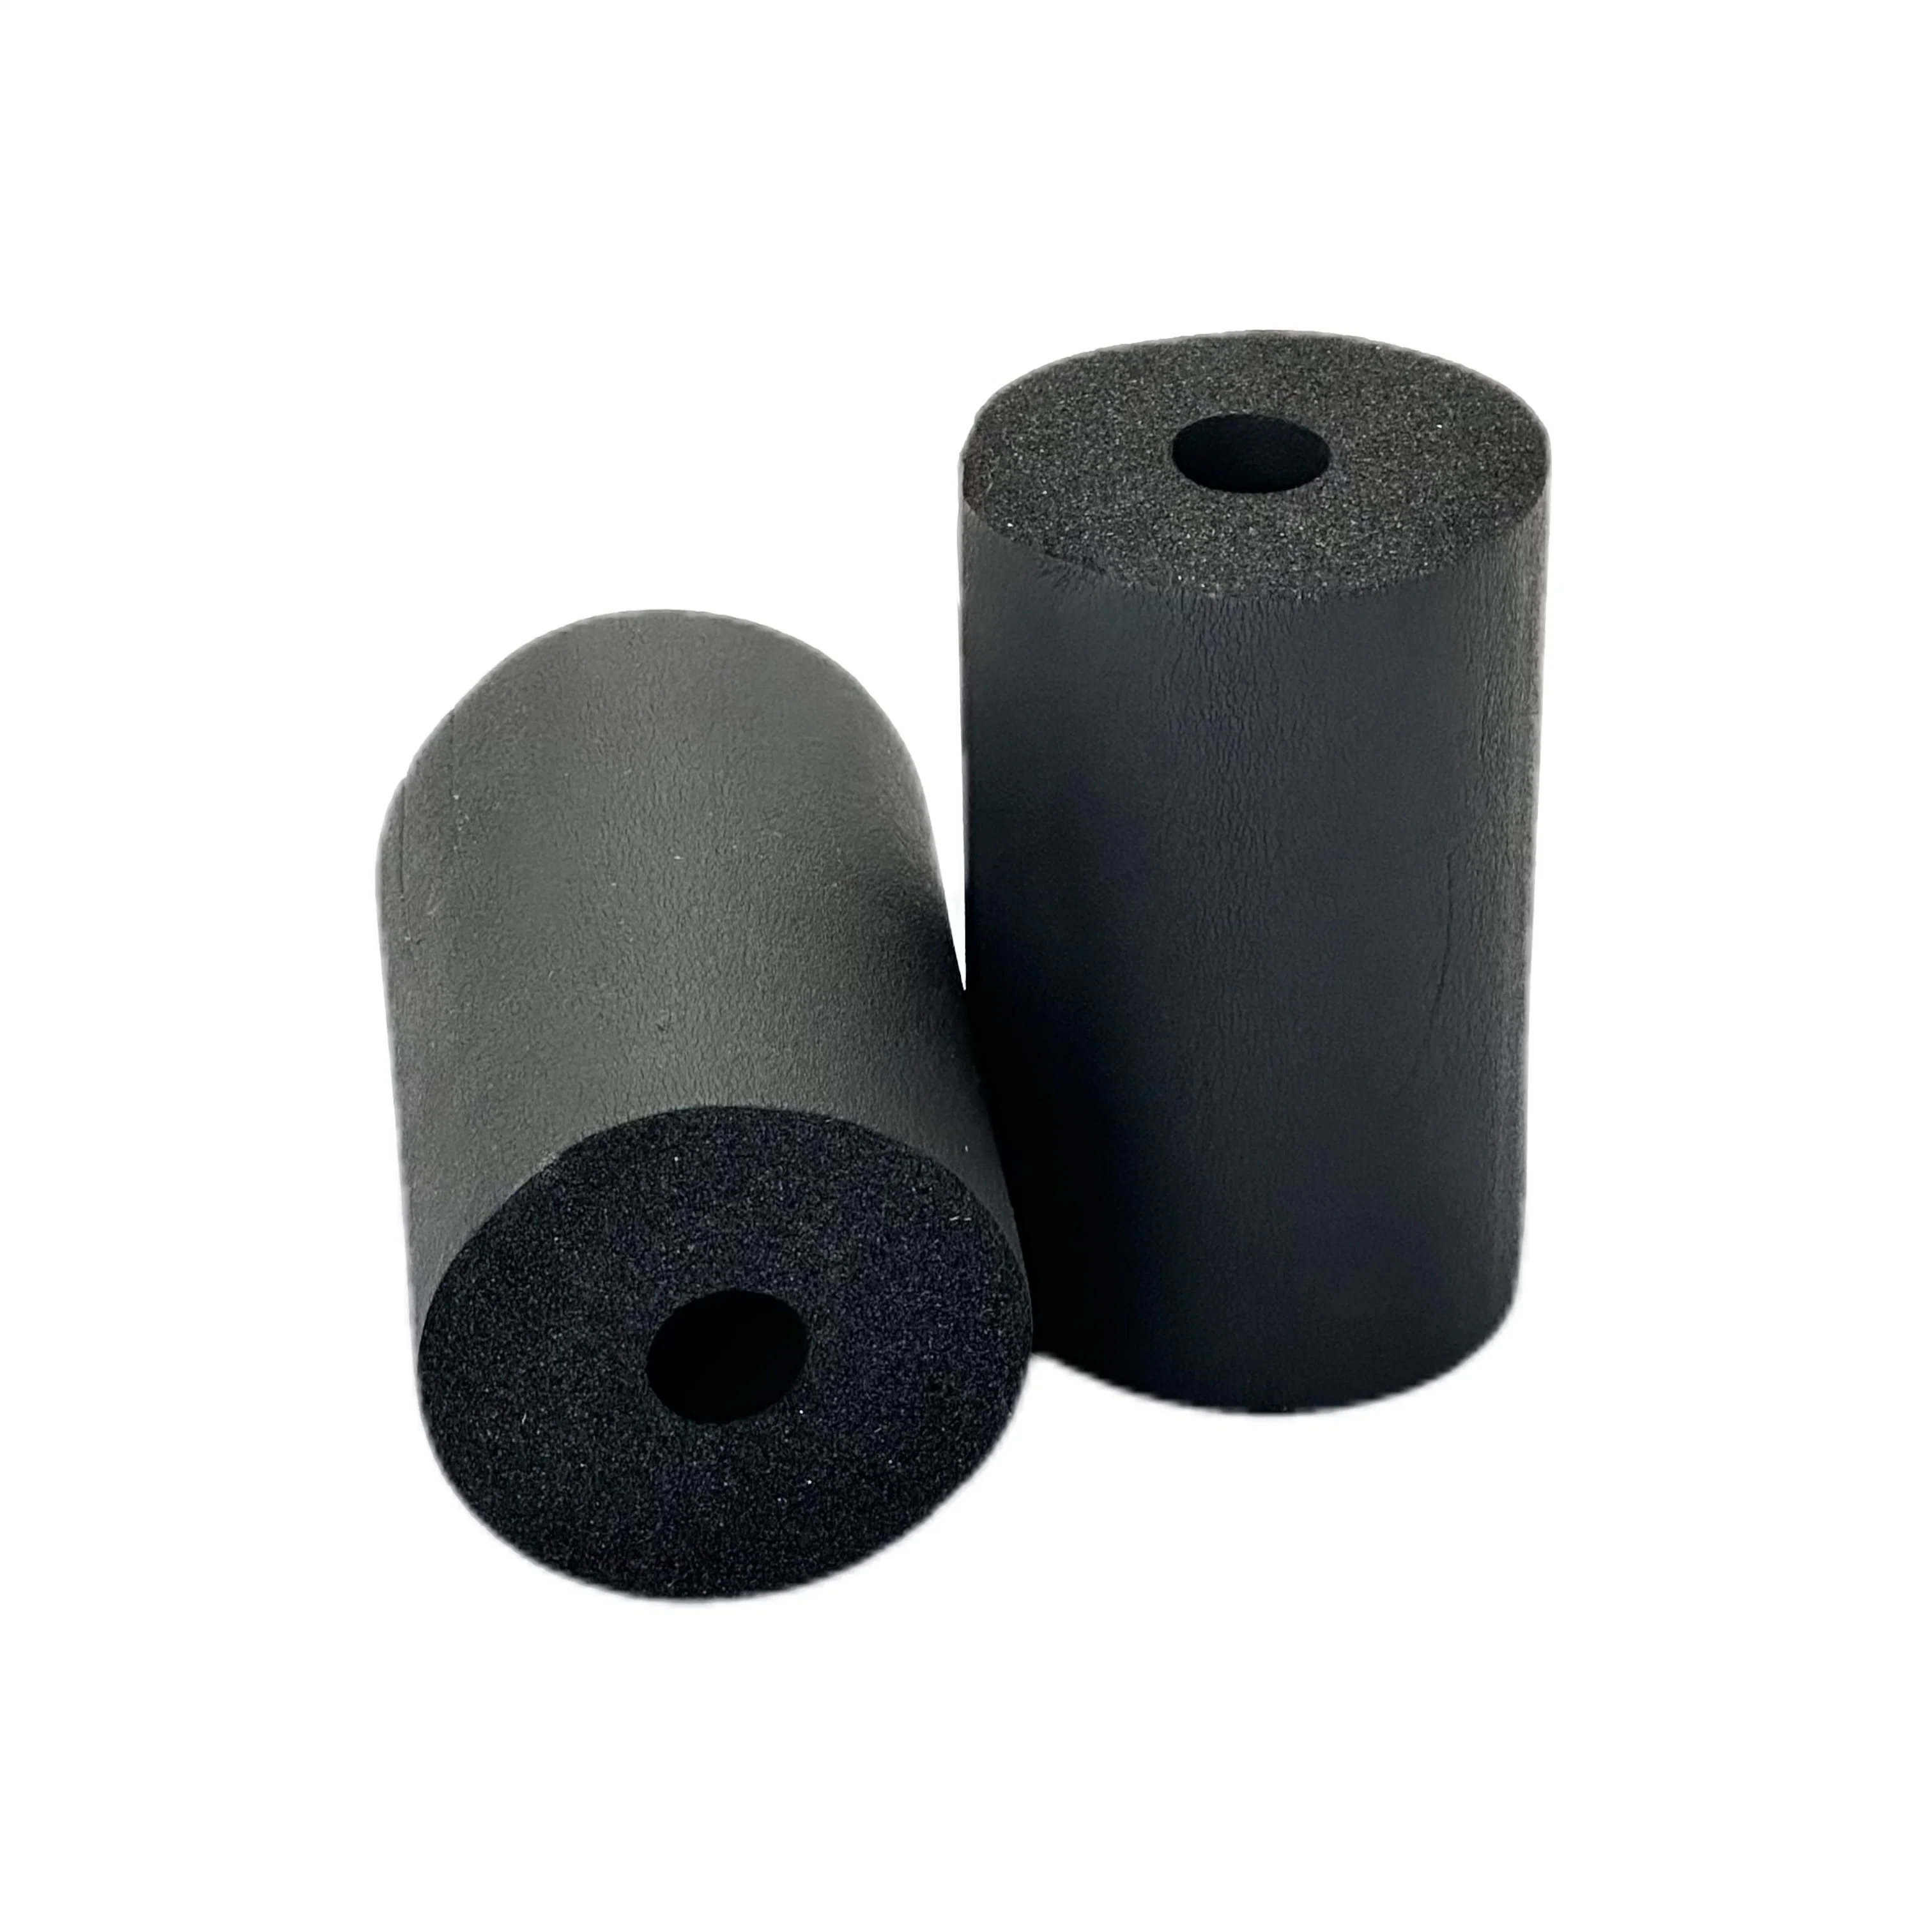 Thermal Insulation Heat Absorbing Acoustic NBR PVC Rubber Foam Sheets Adhesive Rubber Insulation Foam